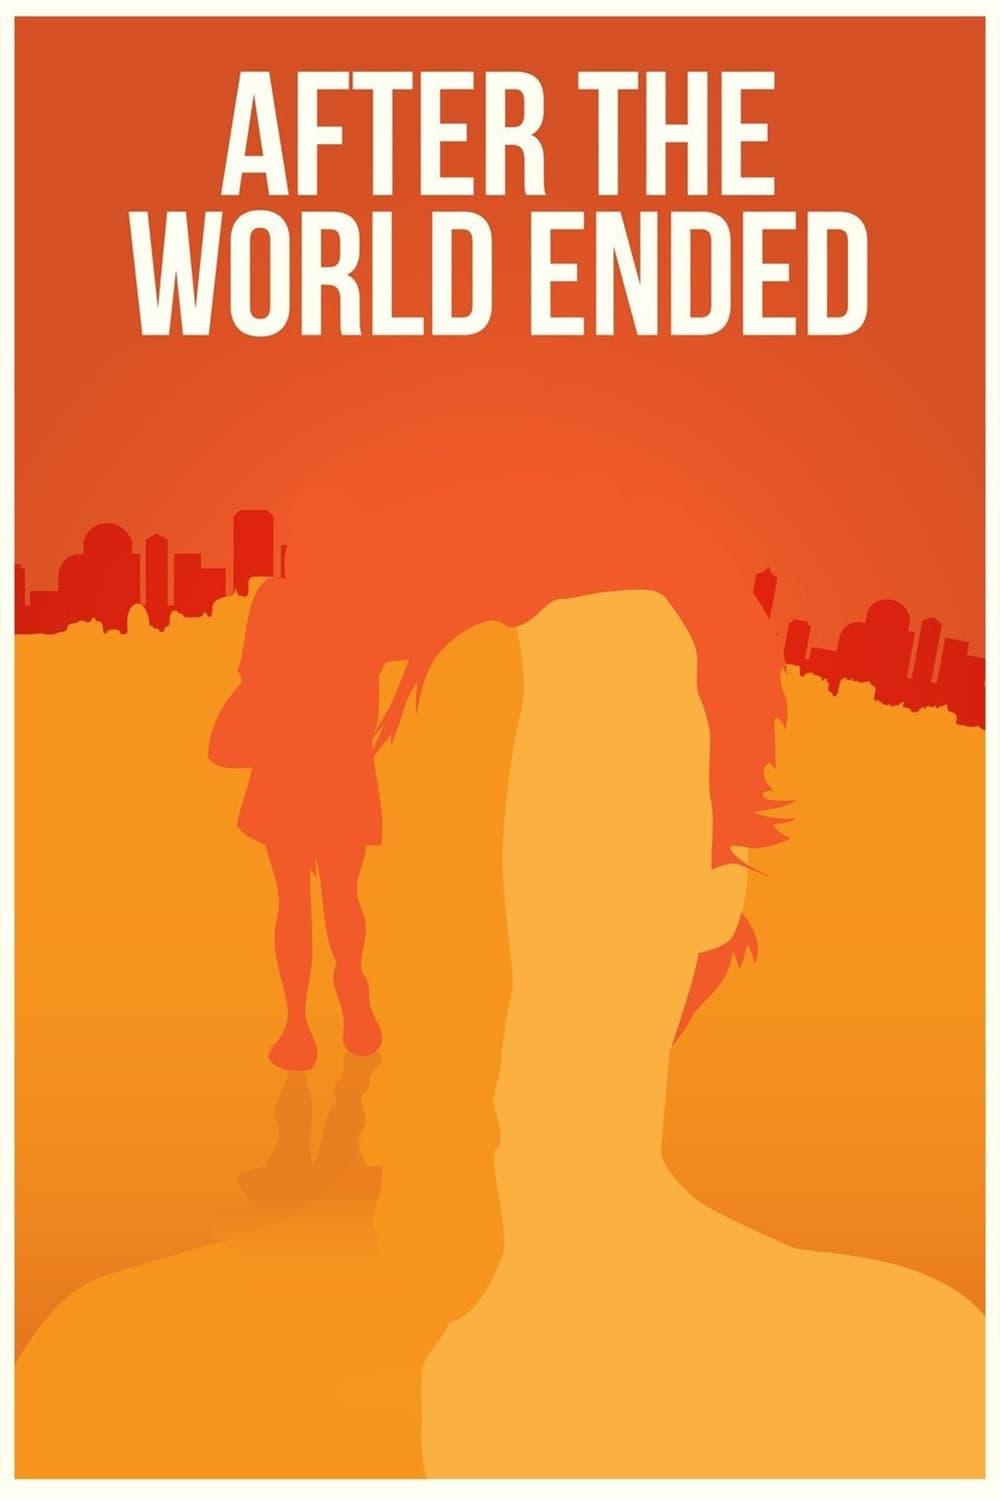 After the World Ended poster